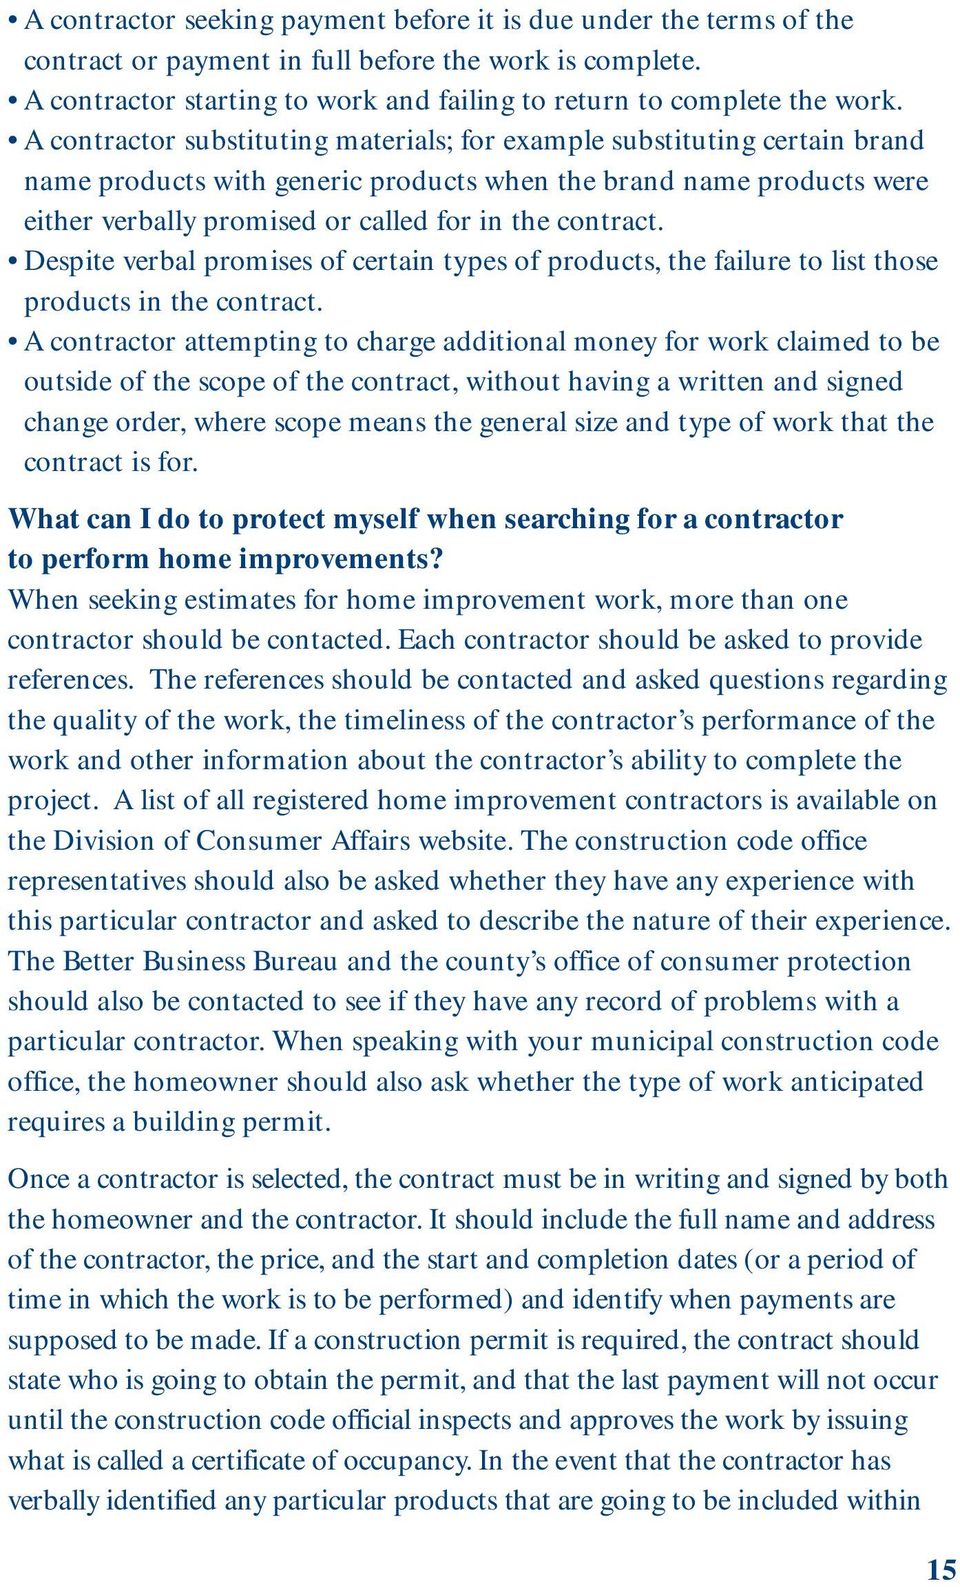 contract. Despite verbal promises of certain types of products, the failure to list those products in the contract.